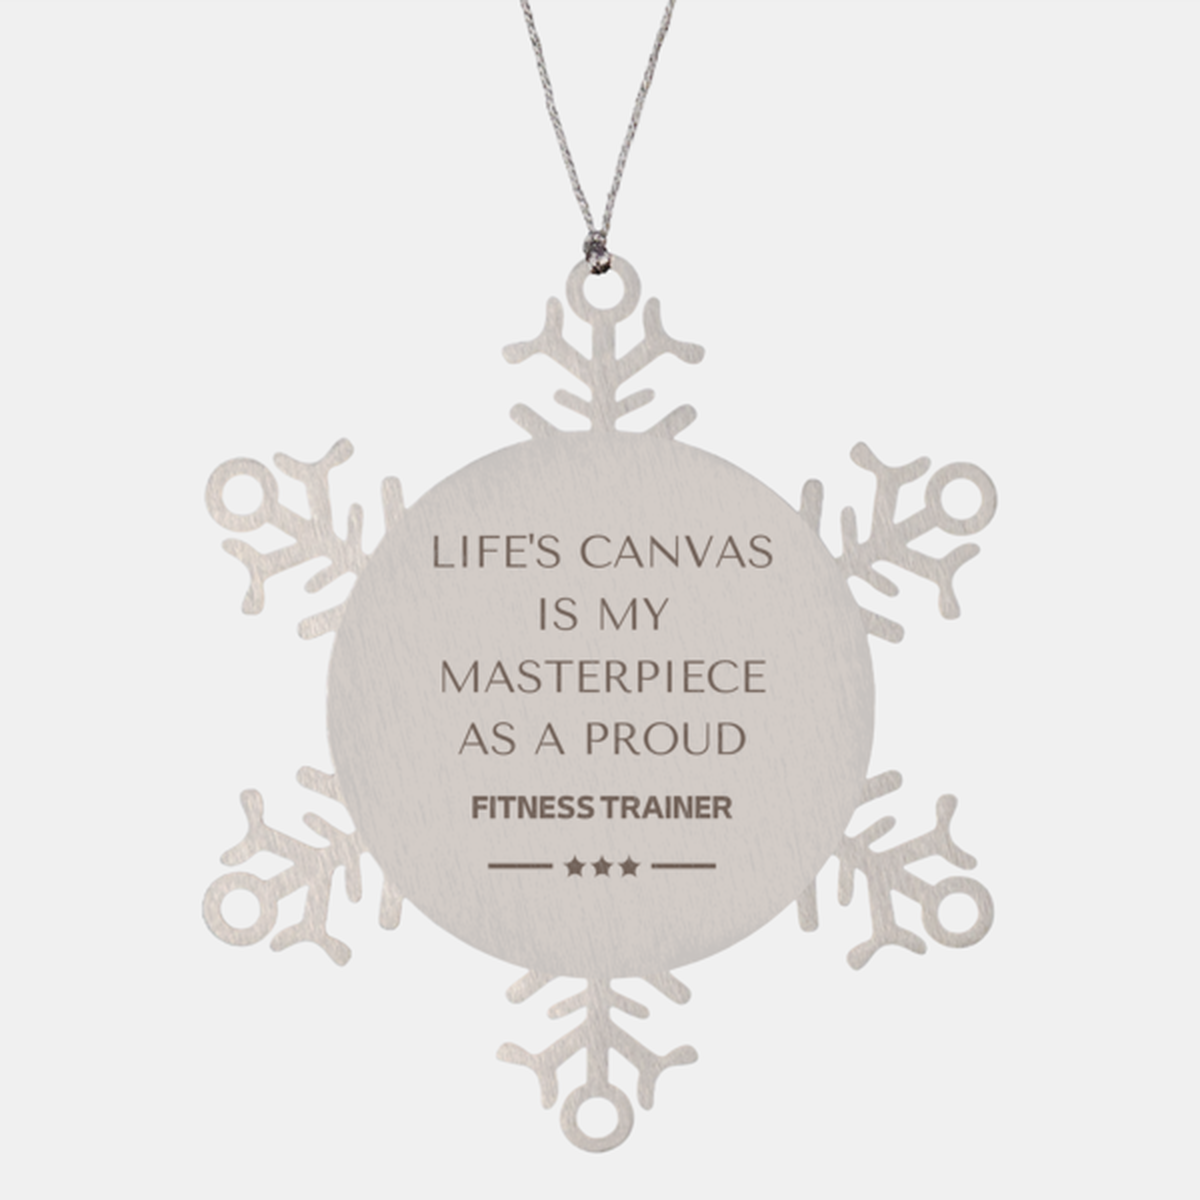 Proud Fitness Trainer Gifts, Life's canvas is my masterpiece, Epic Birthday Christmas Unique Snowflake Ornament For Fitness Trainer, Coworkers, Men, Women, Friends